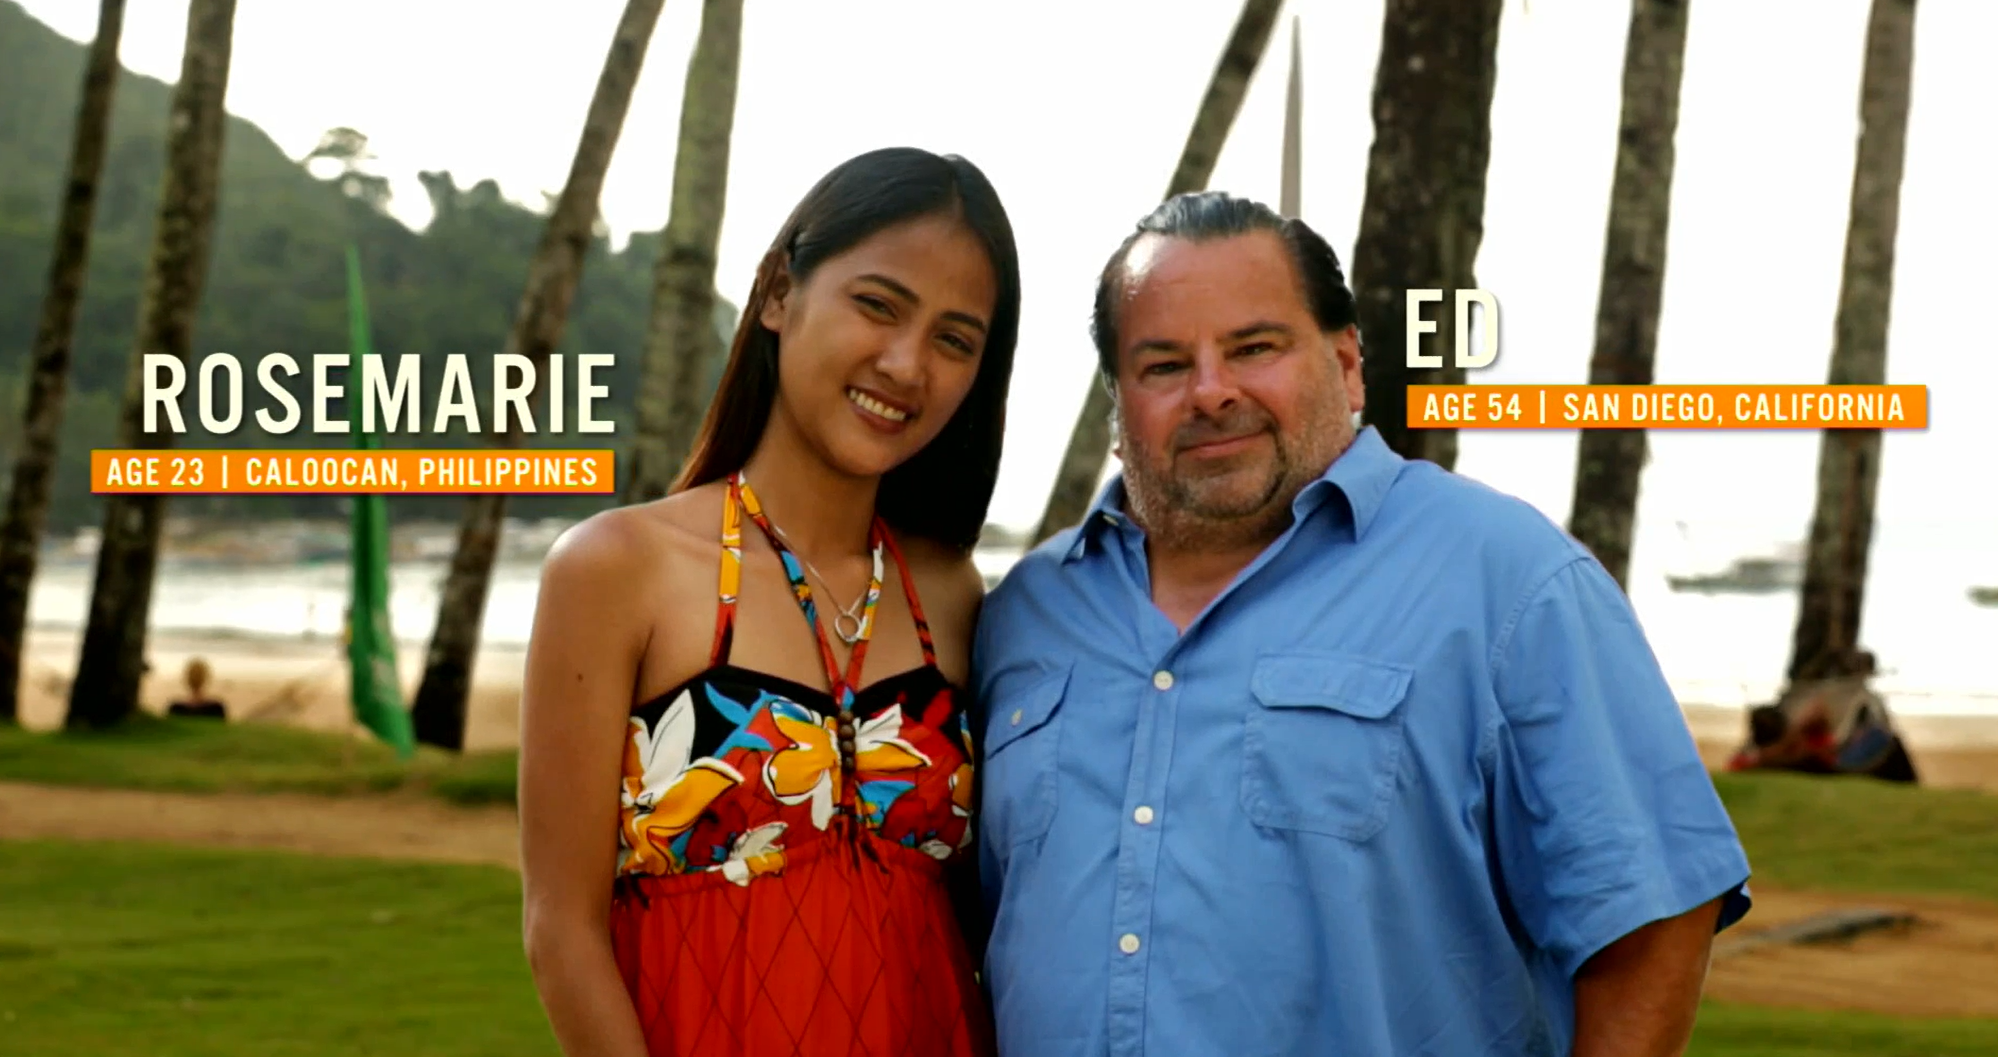 Will Ed and Rosemarie be on '90 Day Fiancé: Self-Quarantine...